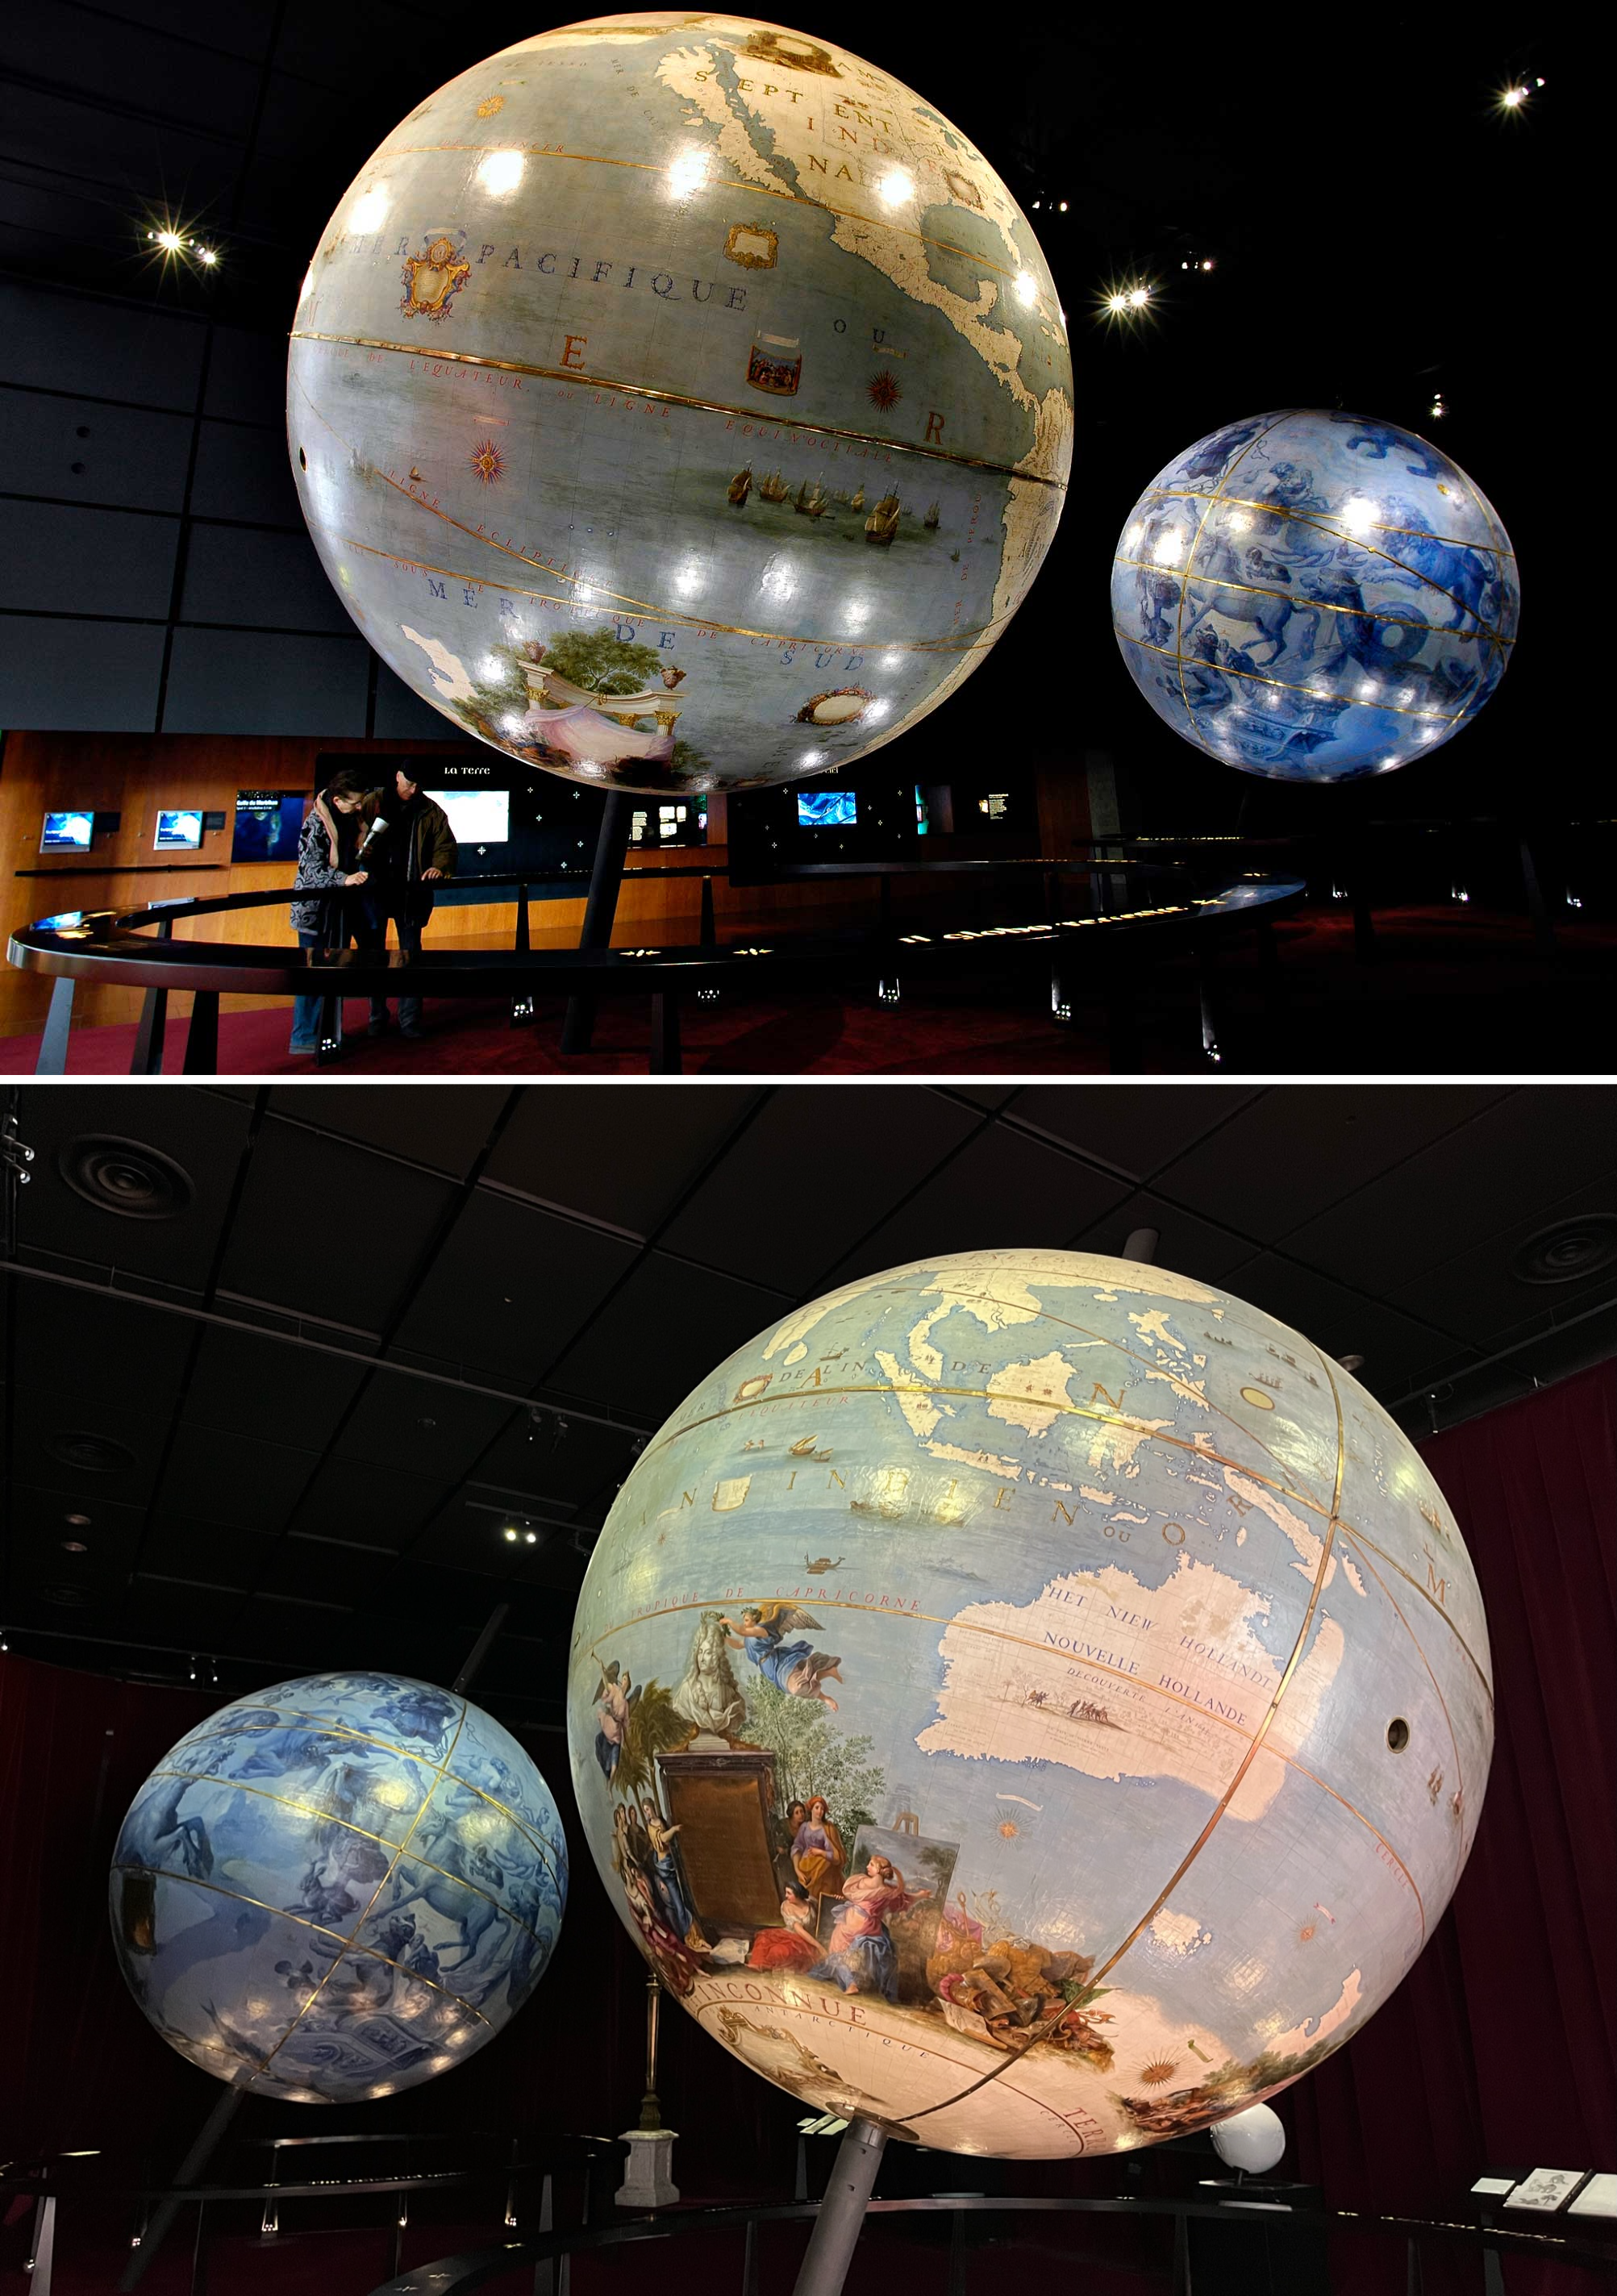 The Coronelli Globes are a pair of large globes (terrestrial and celestial) created by Vincenzo Coronelli and offered to Louis XIV in 1688. The globes featured the most advanced cartographic knowledge of time.png